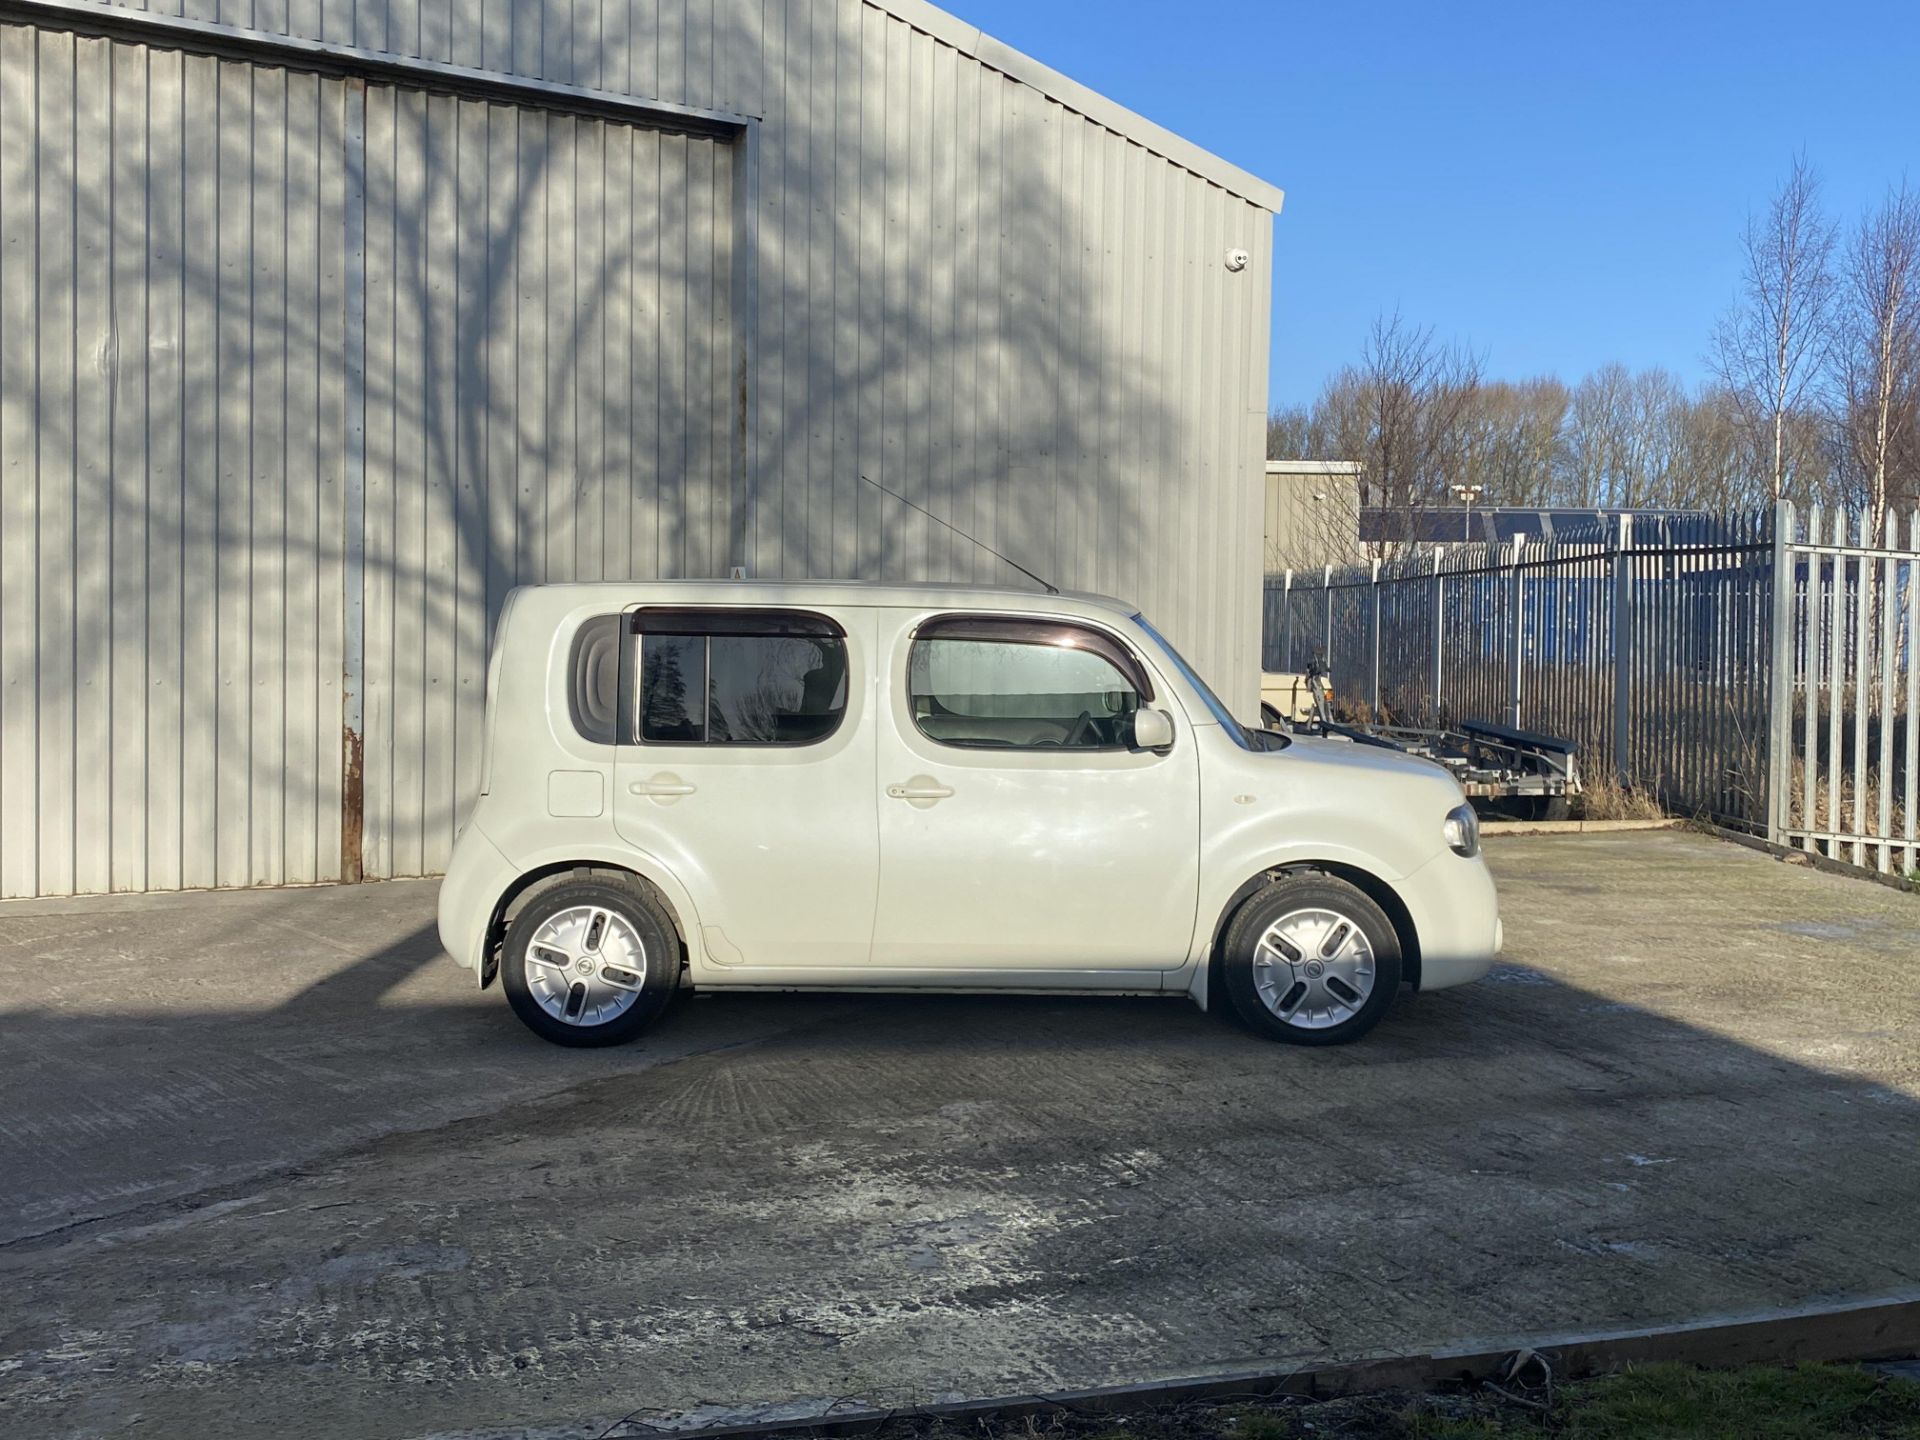 Nissan Cube - Image 2 of 33